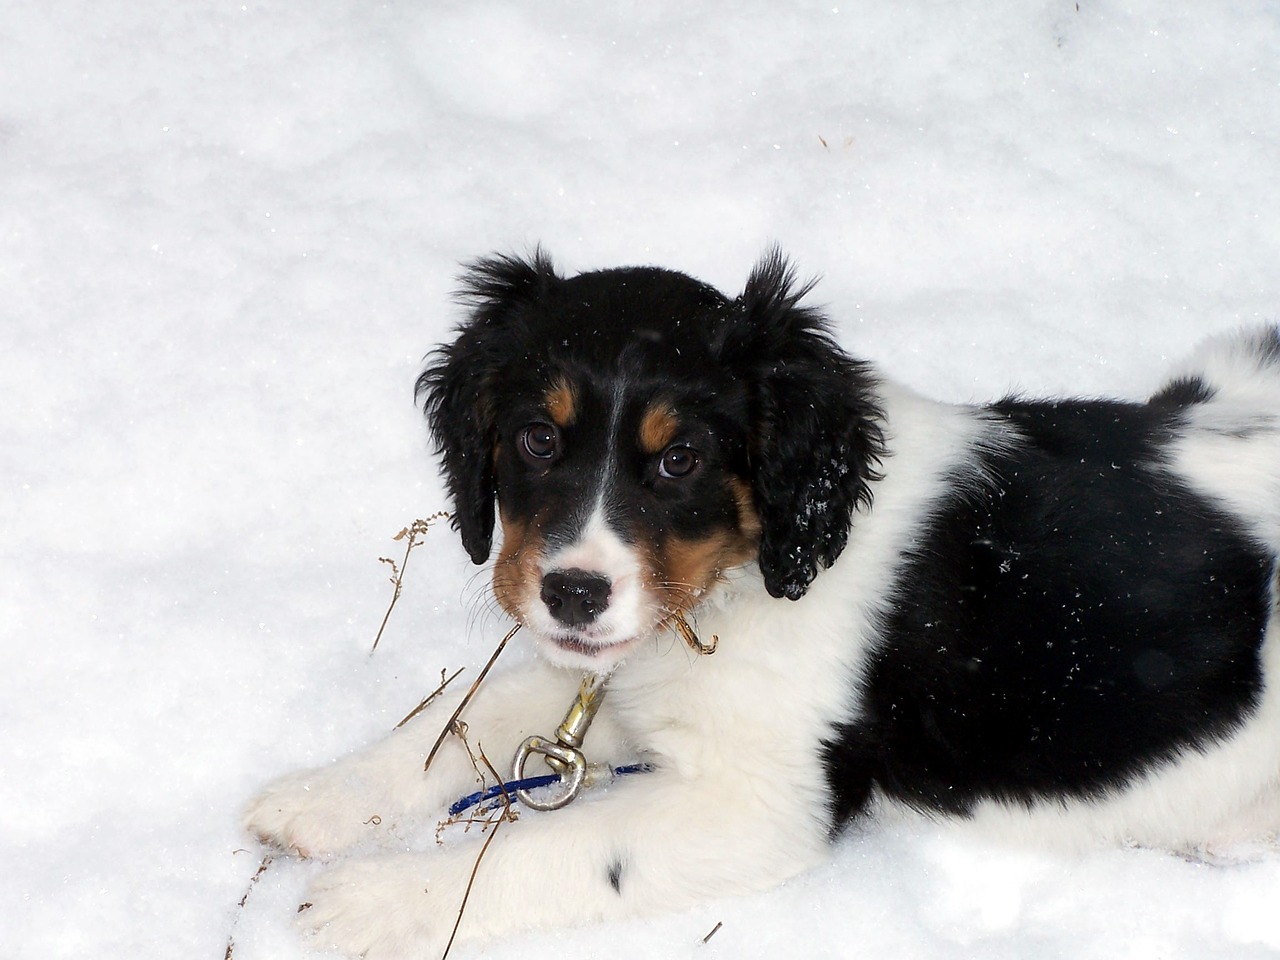 What qualities should gundog puppies have?